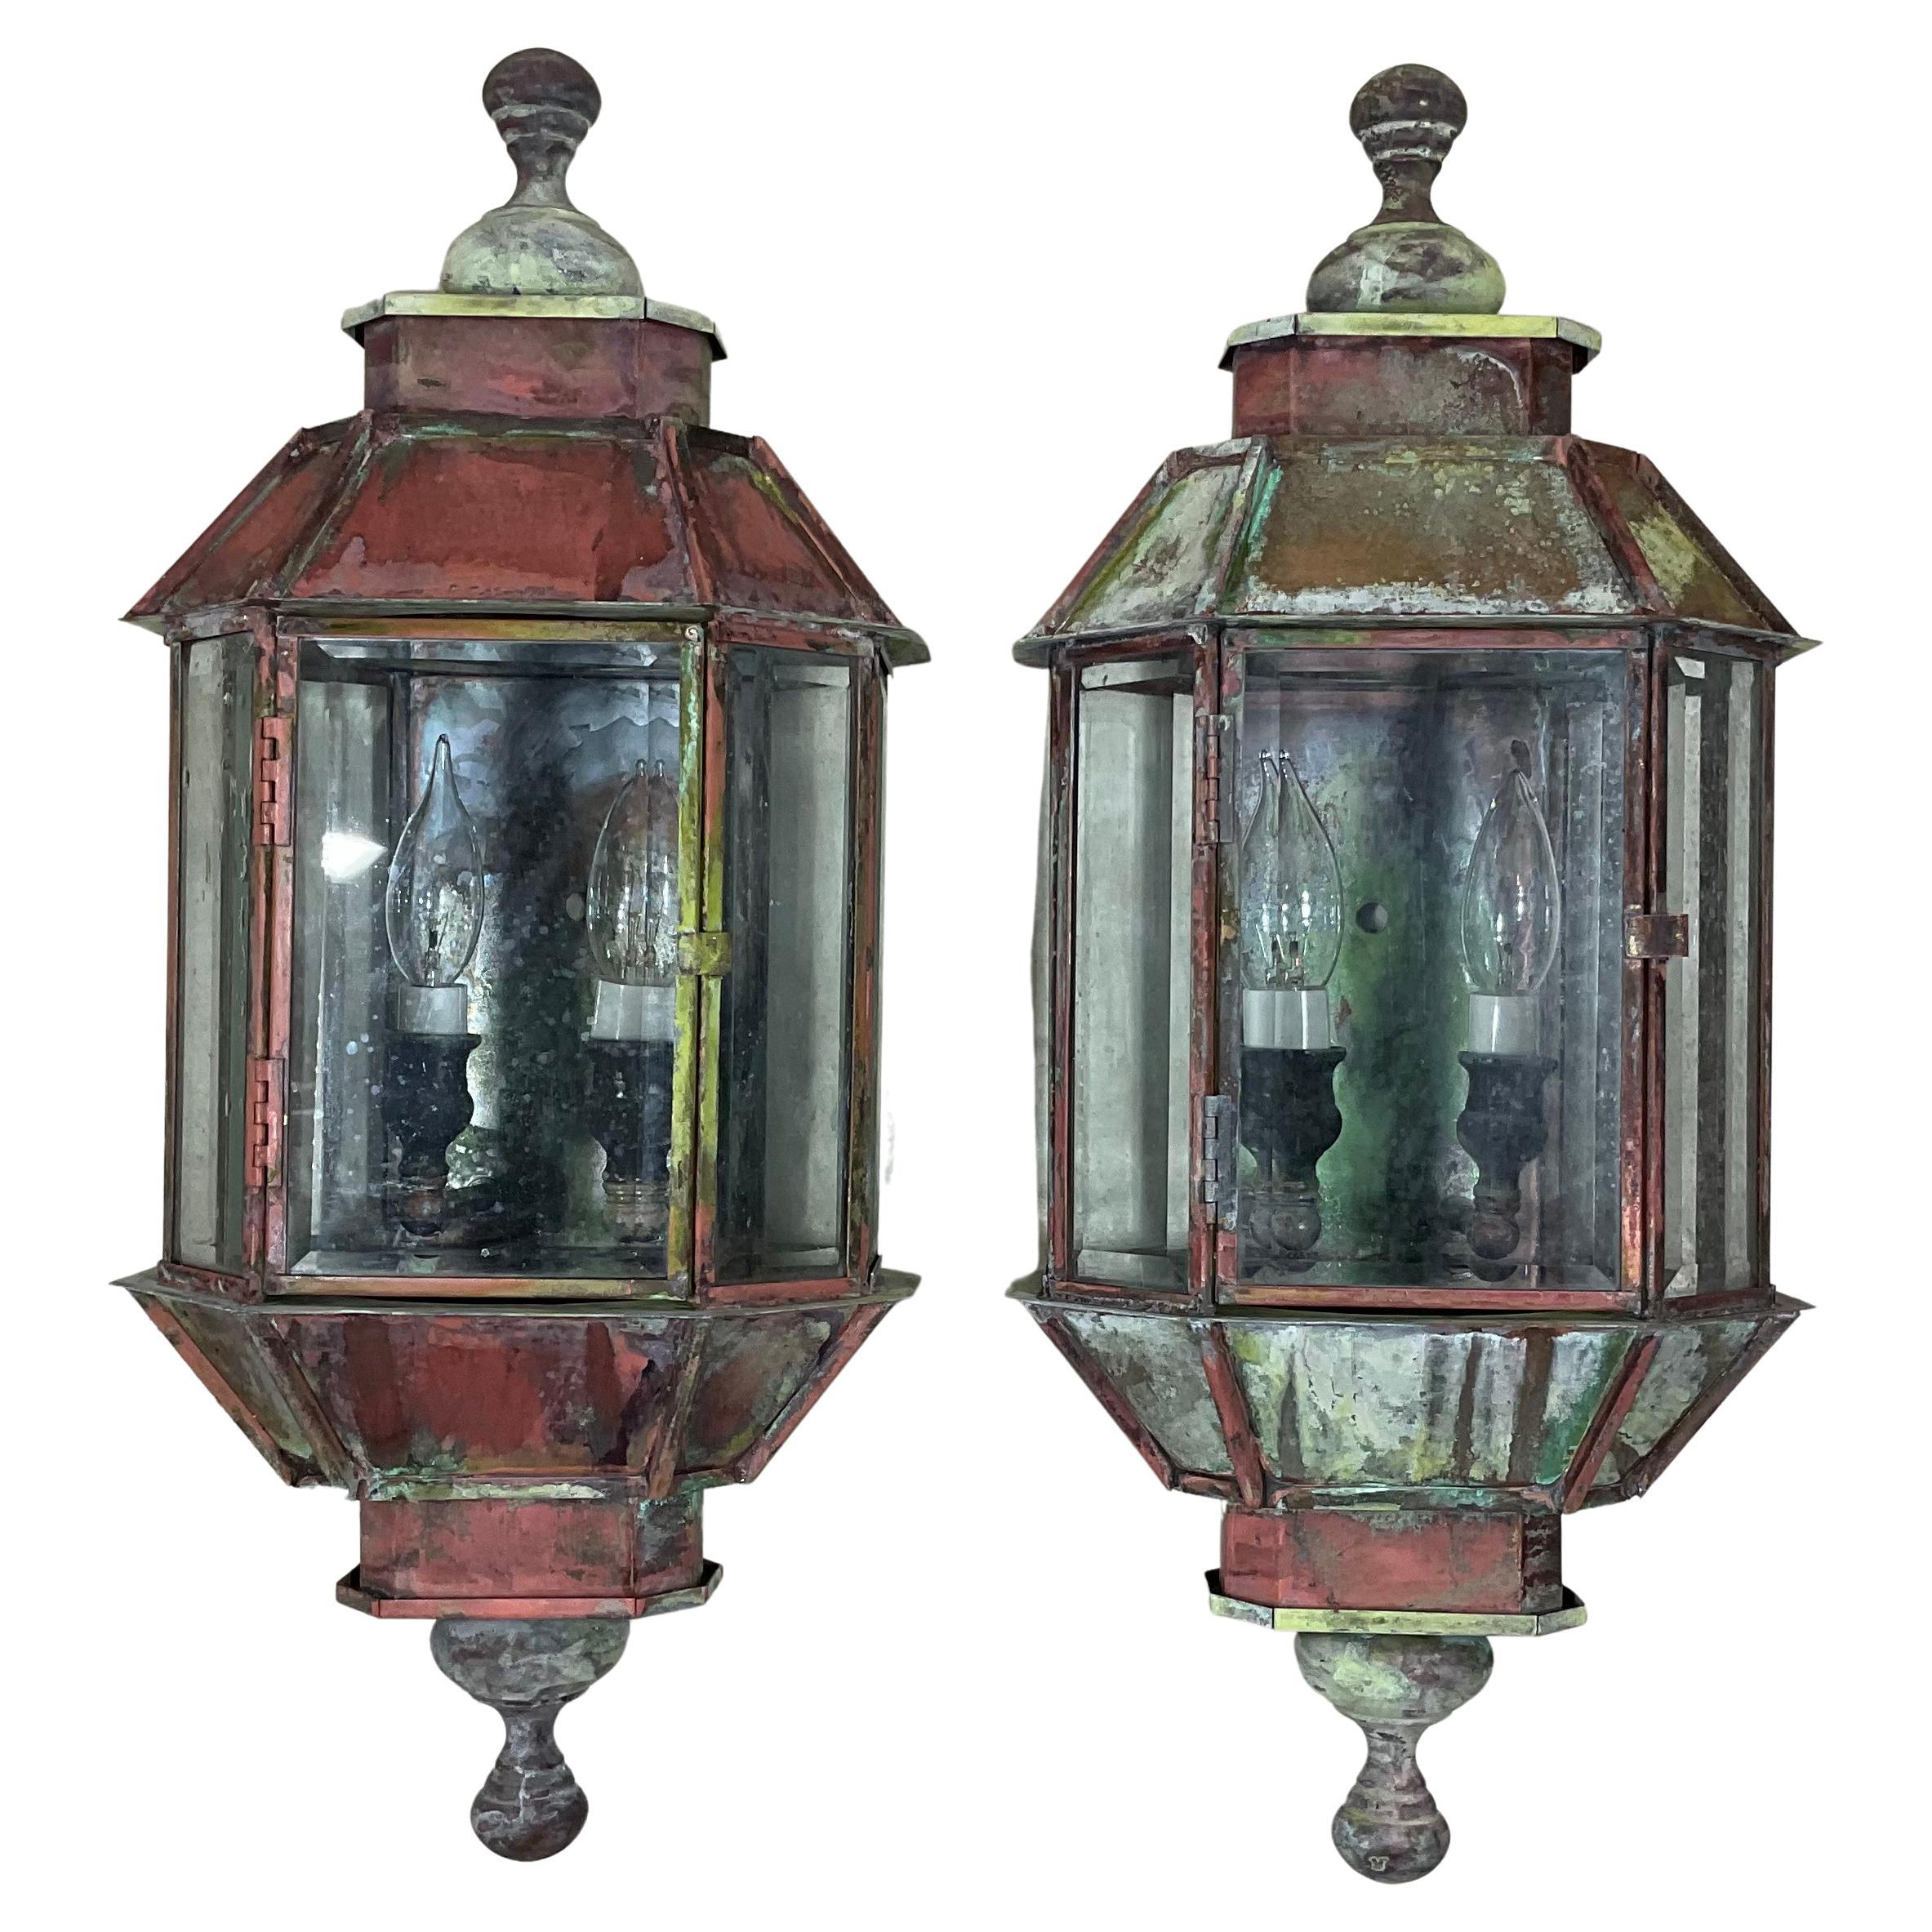 Pair of Vintage Handcrafted Wall-Mounted Copper-Brass Lantern